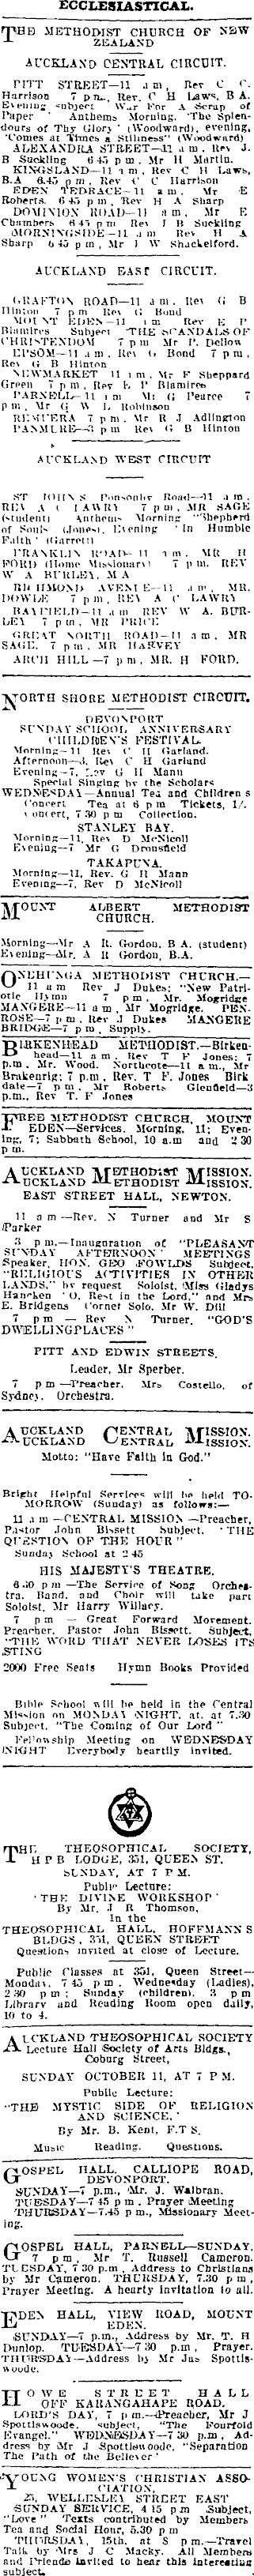 Papers Past Newspapers Auckland Star 10 October 1914 Page 2 Advertisements Column 2